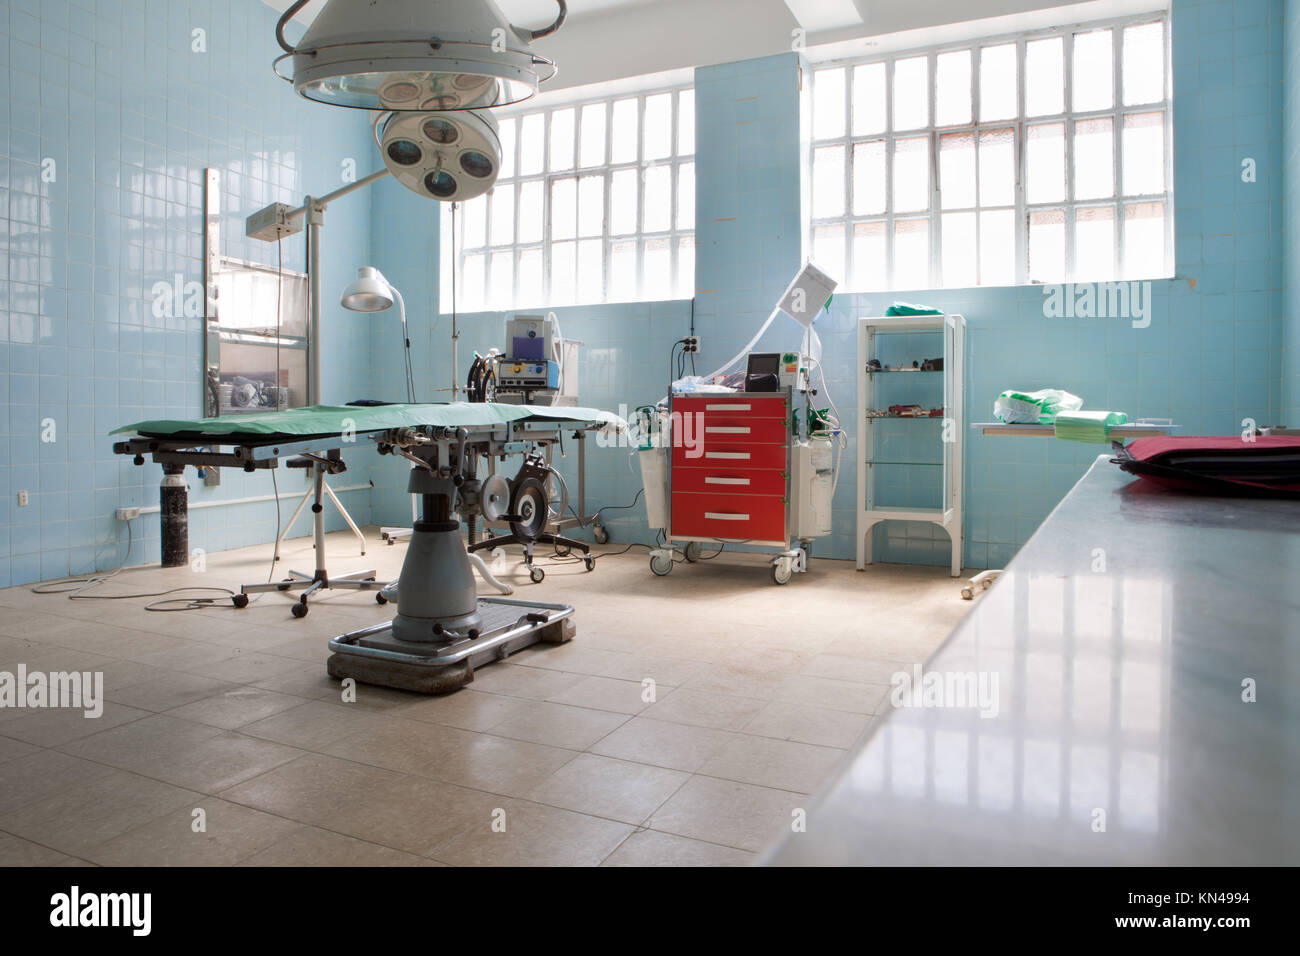 Empty operating-room of a bullring. Bullfighters used to be wounded by the bull so the surgical operation room belong the bullring facilities. Stock Photo